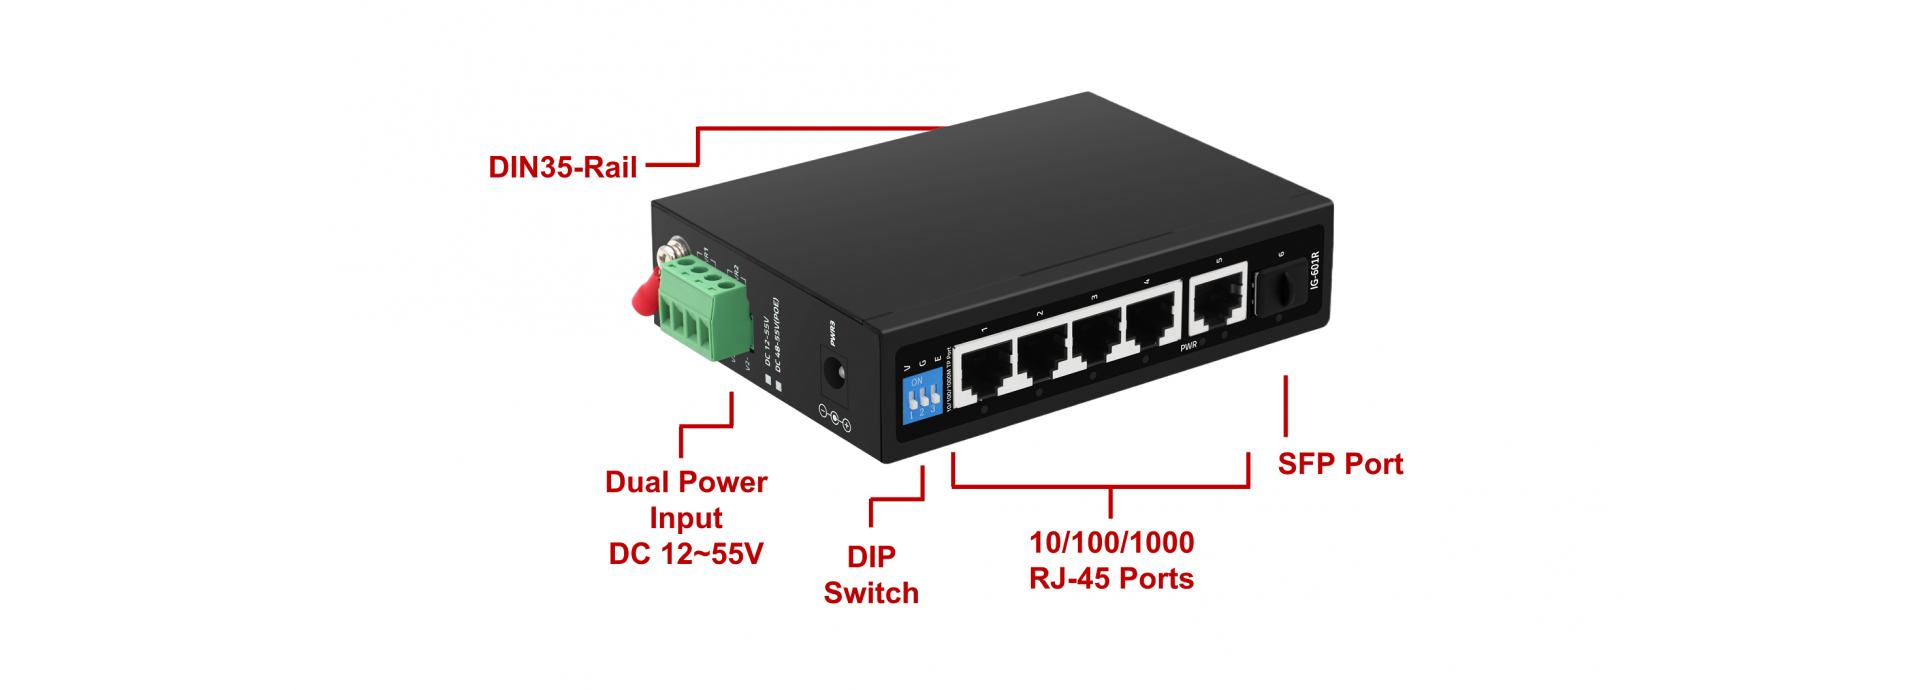 Reliable Industrial-grade Unmanaged Switch for extreme environment